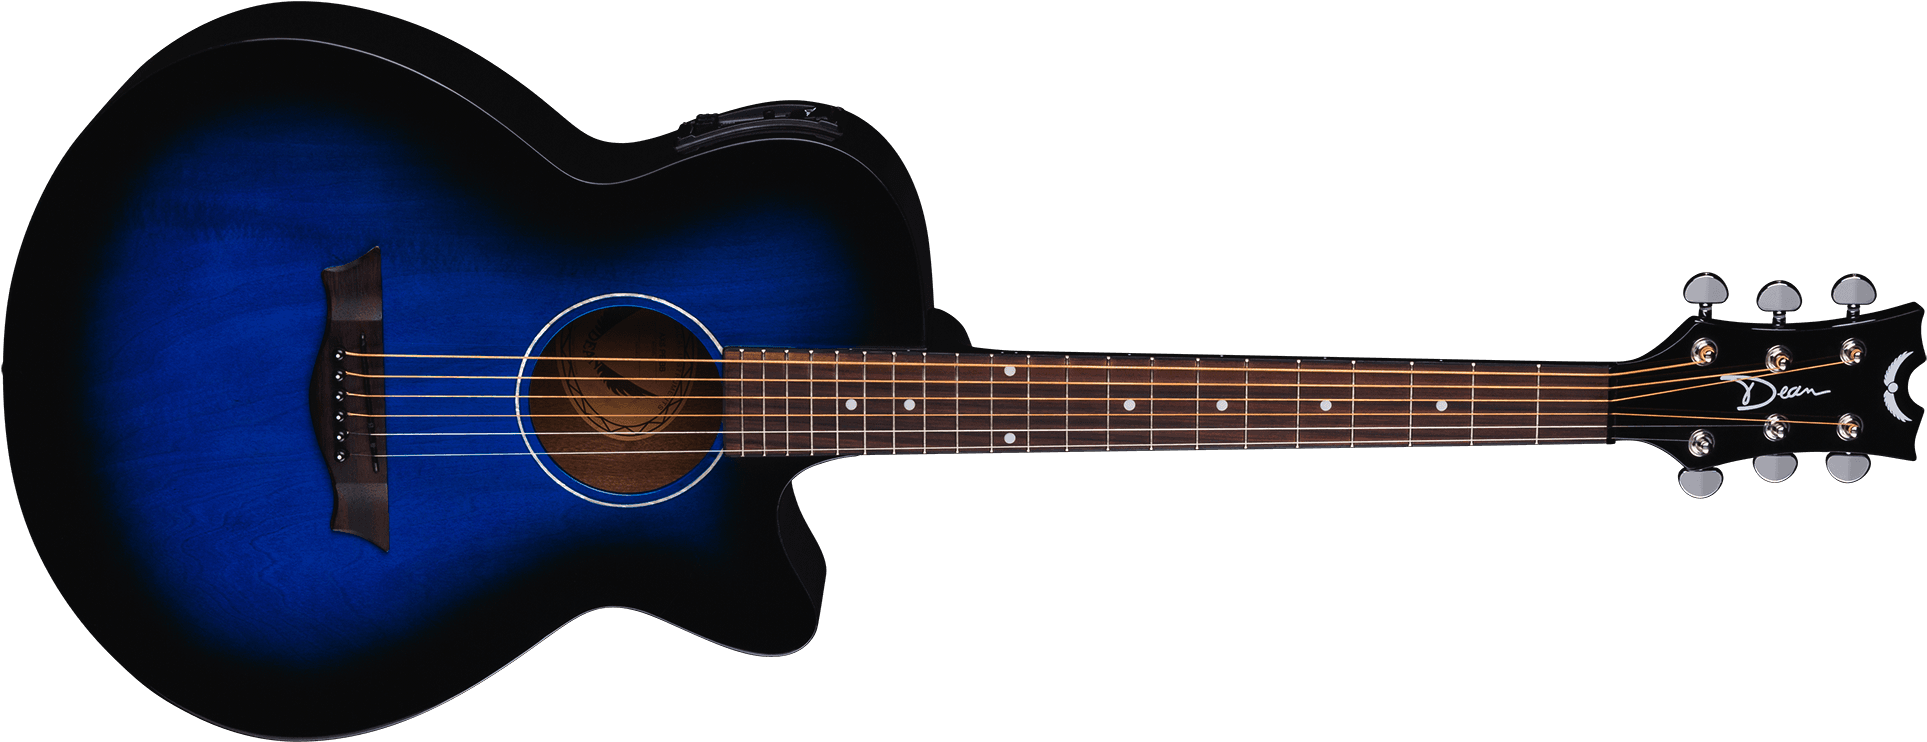 A Blue Guitar With A Black Background